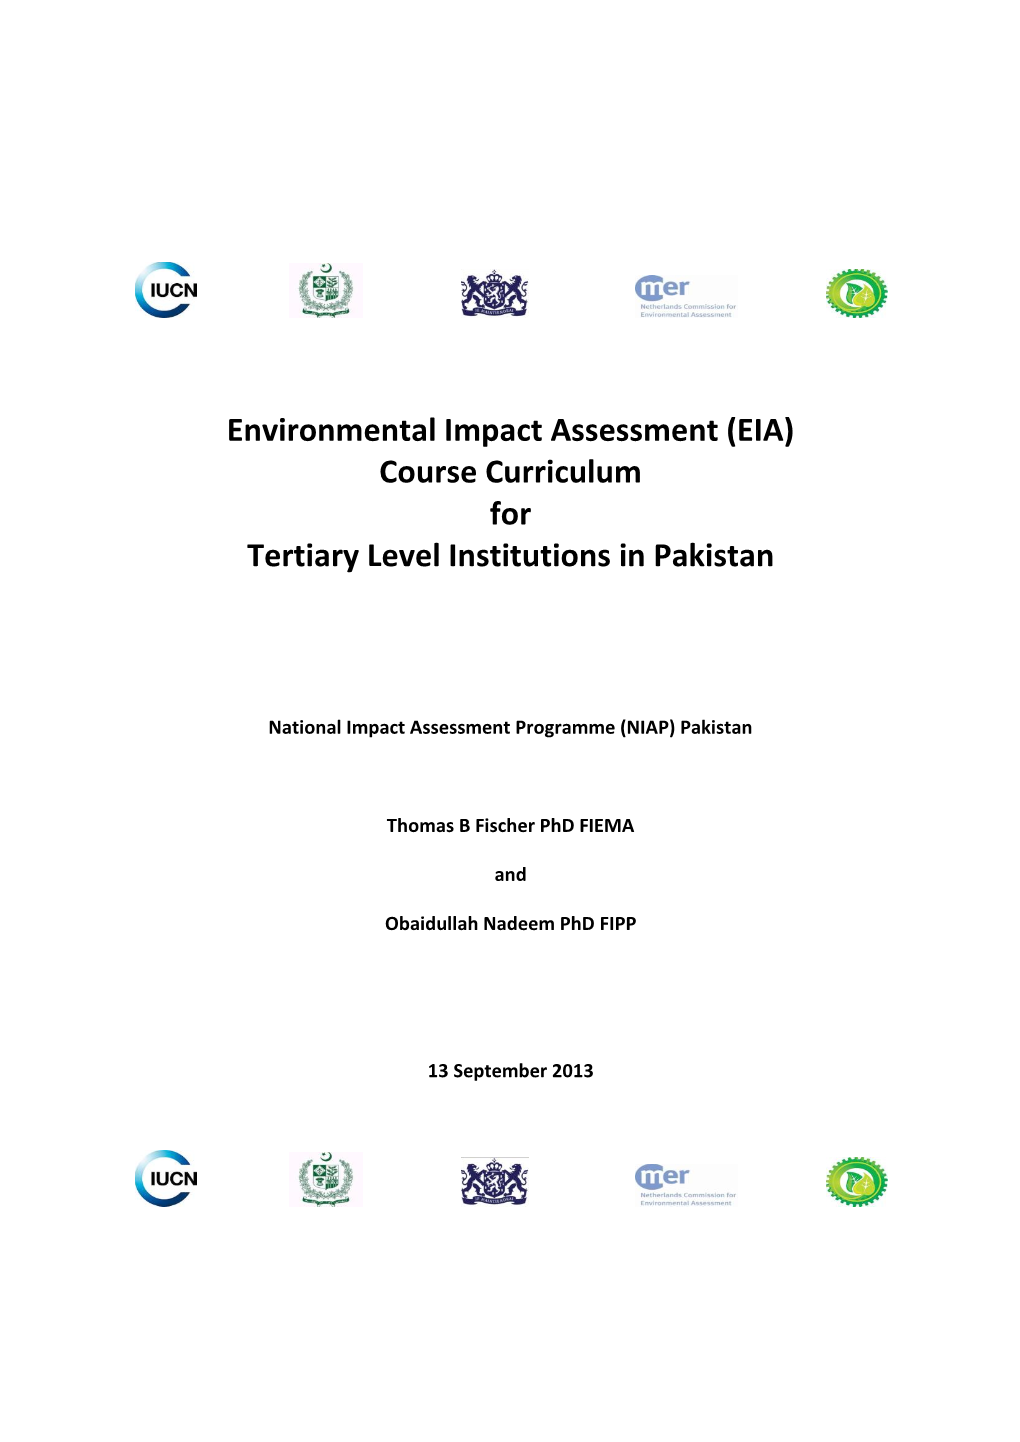 EIA) Course Curriculum for Tertiary Level Institutions in Pakistan